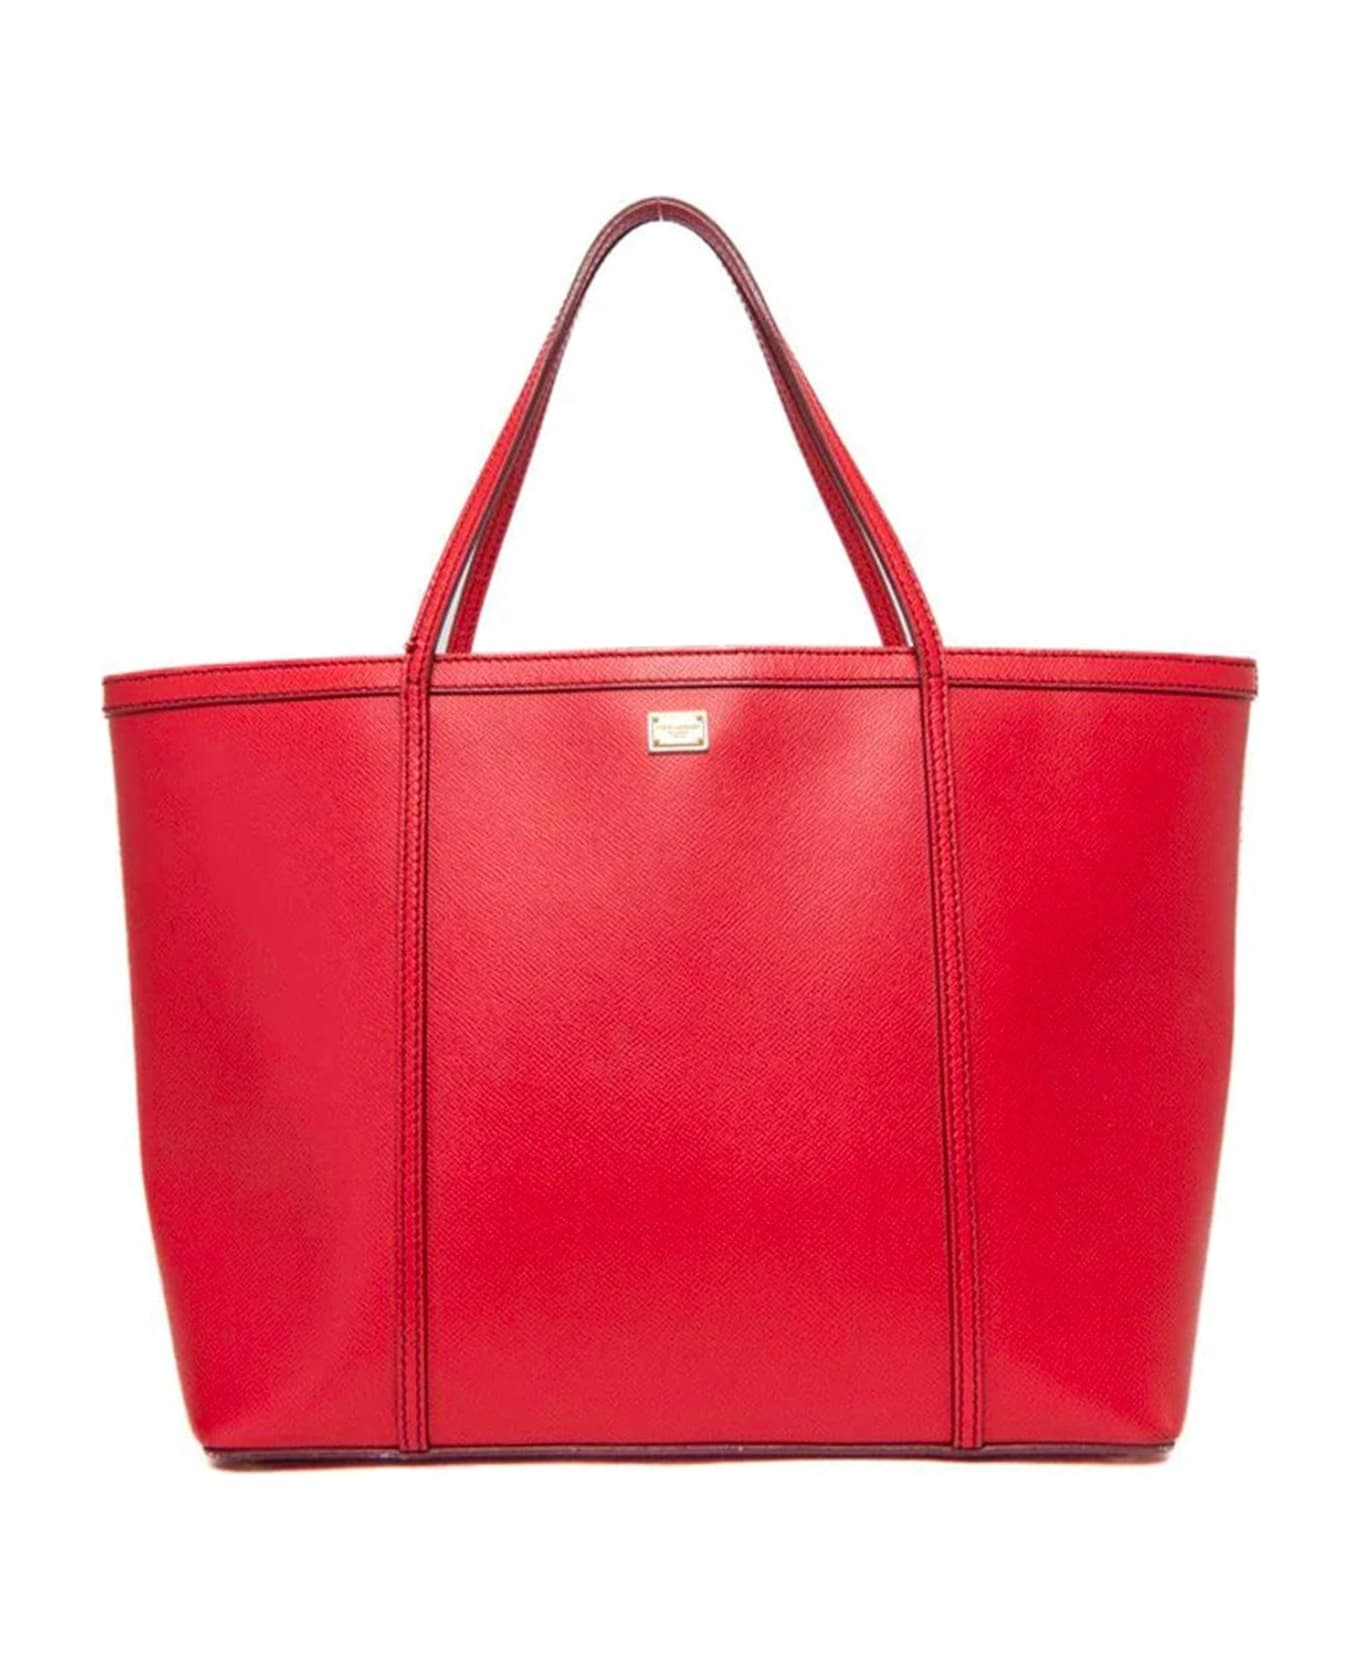 Dolce & Gabbana Leather Tote Bag - Pink トートバッグ